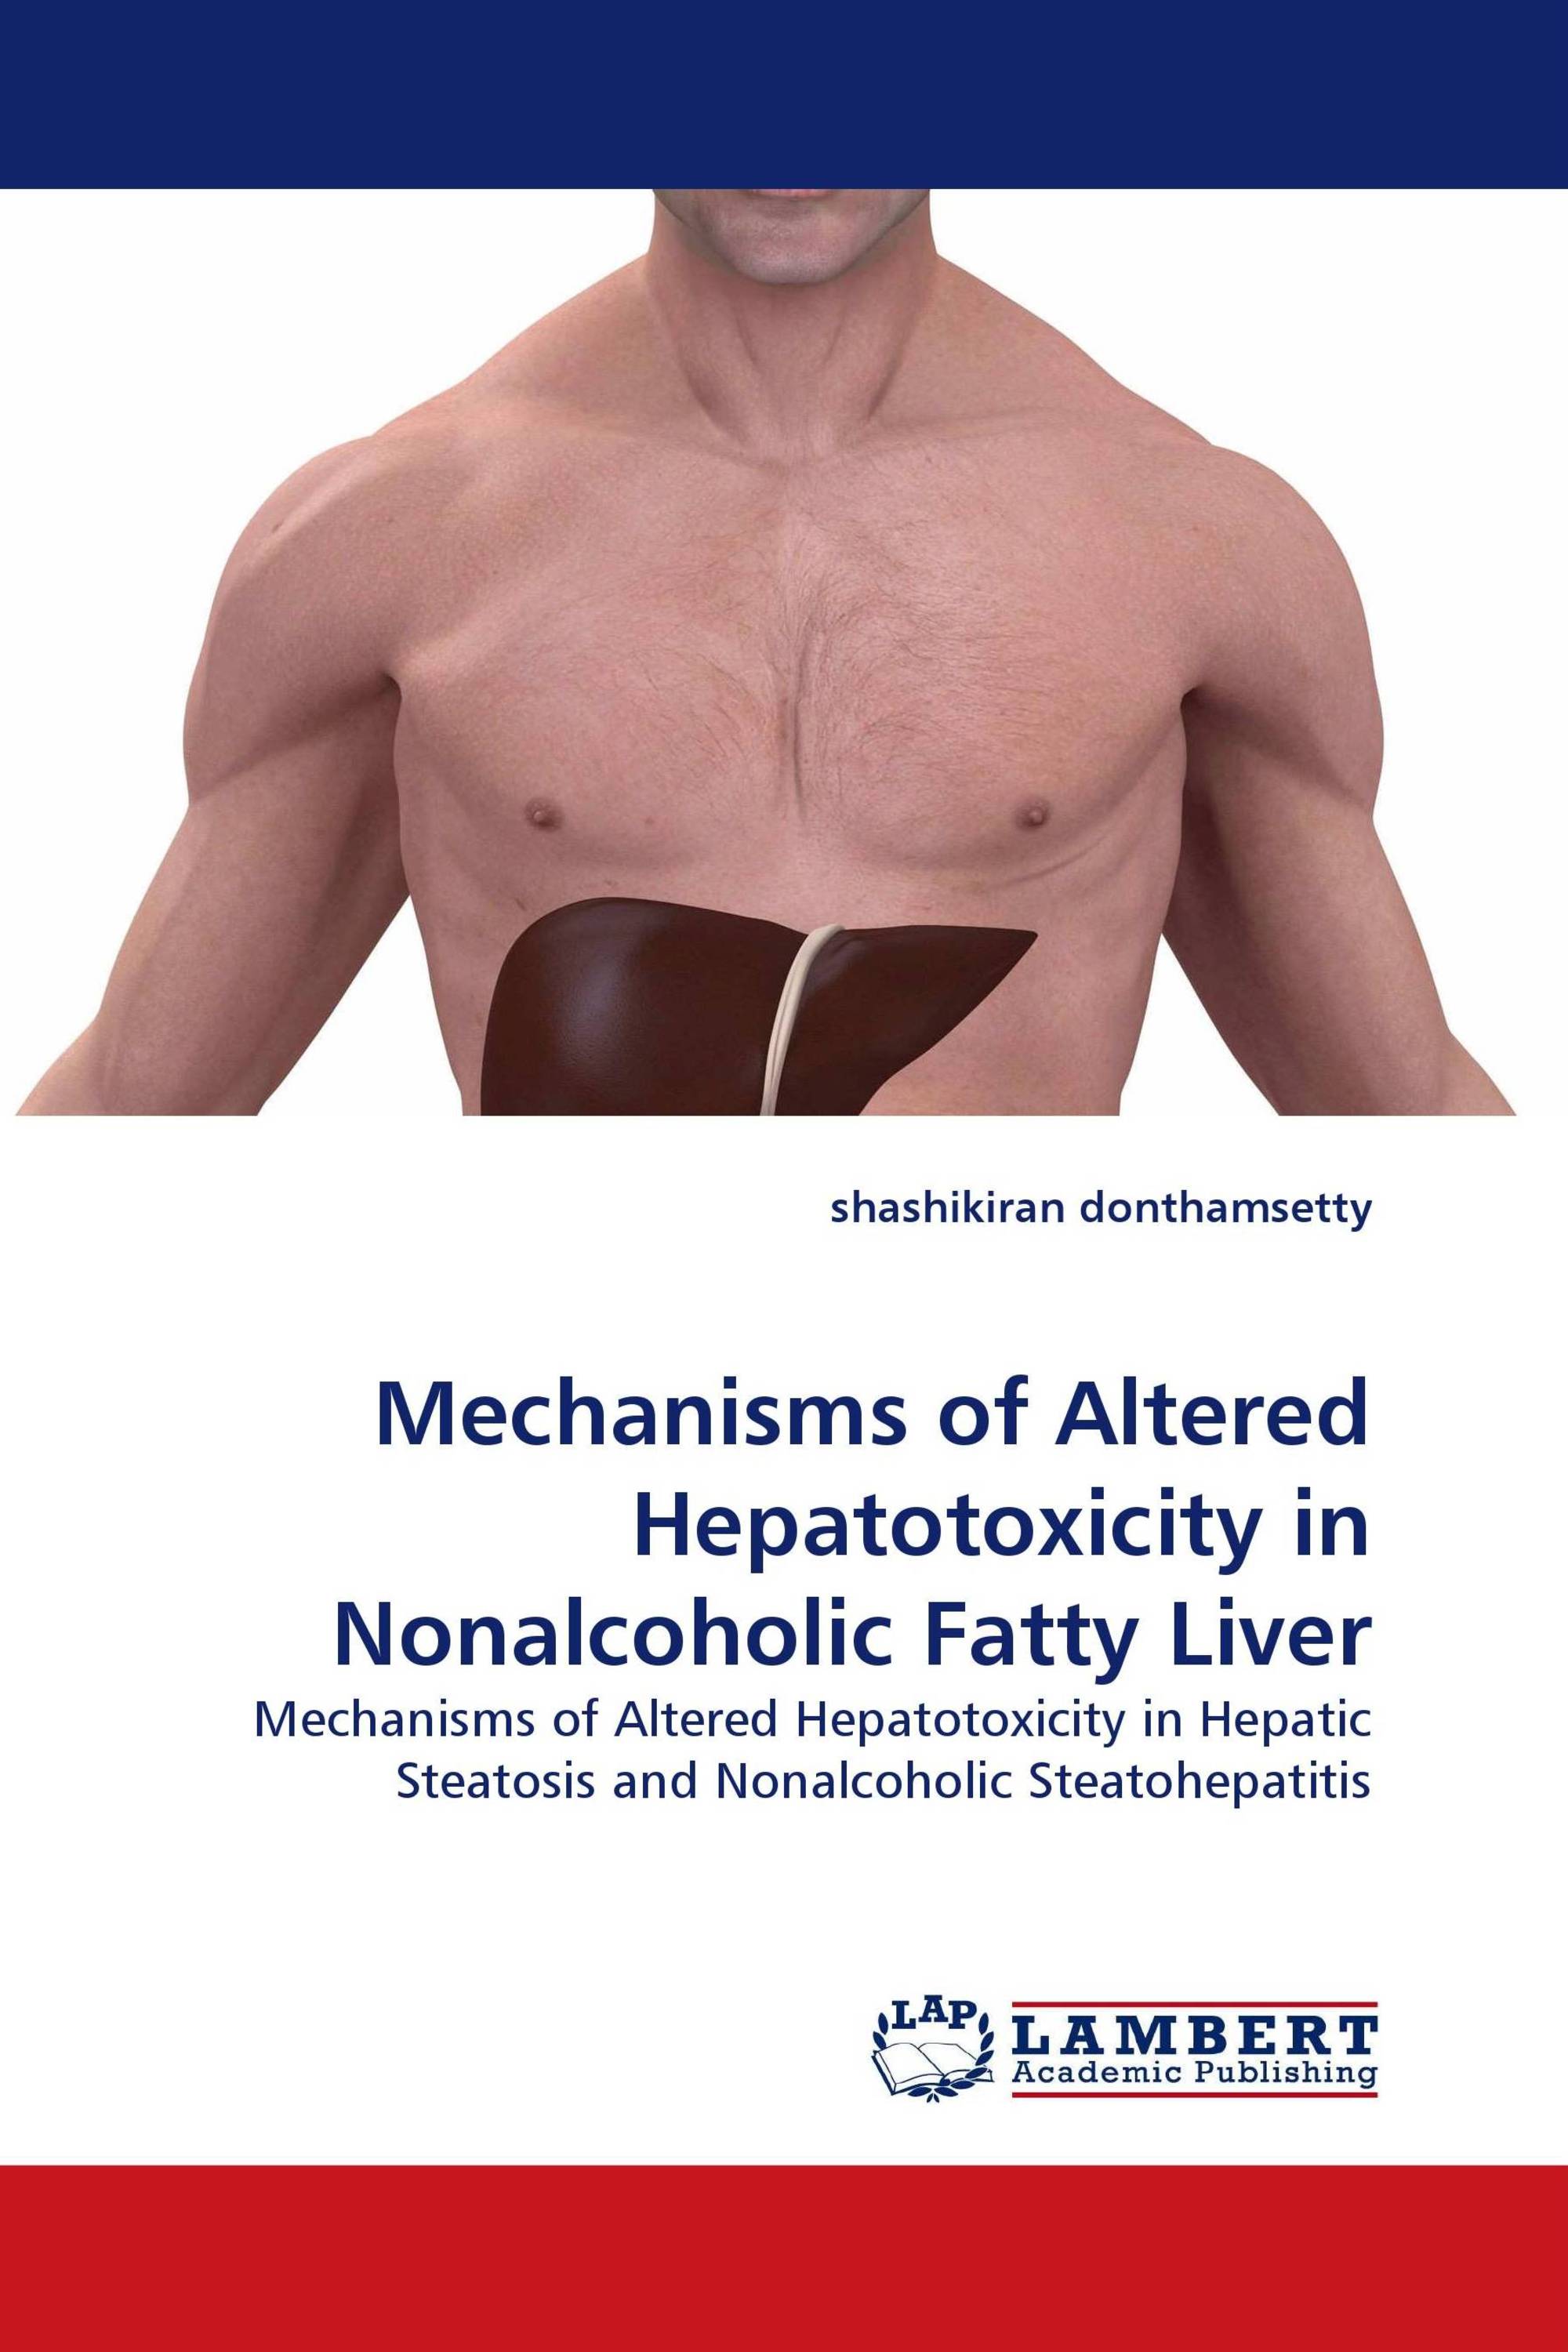 Mechanisms of Altered Hepatotoxicity in Nonalcoholic Fatty Liver